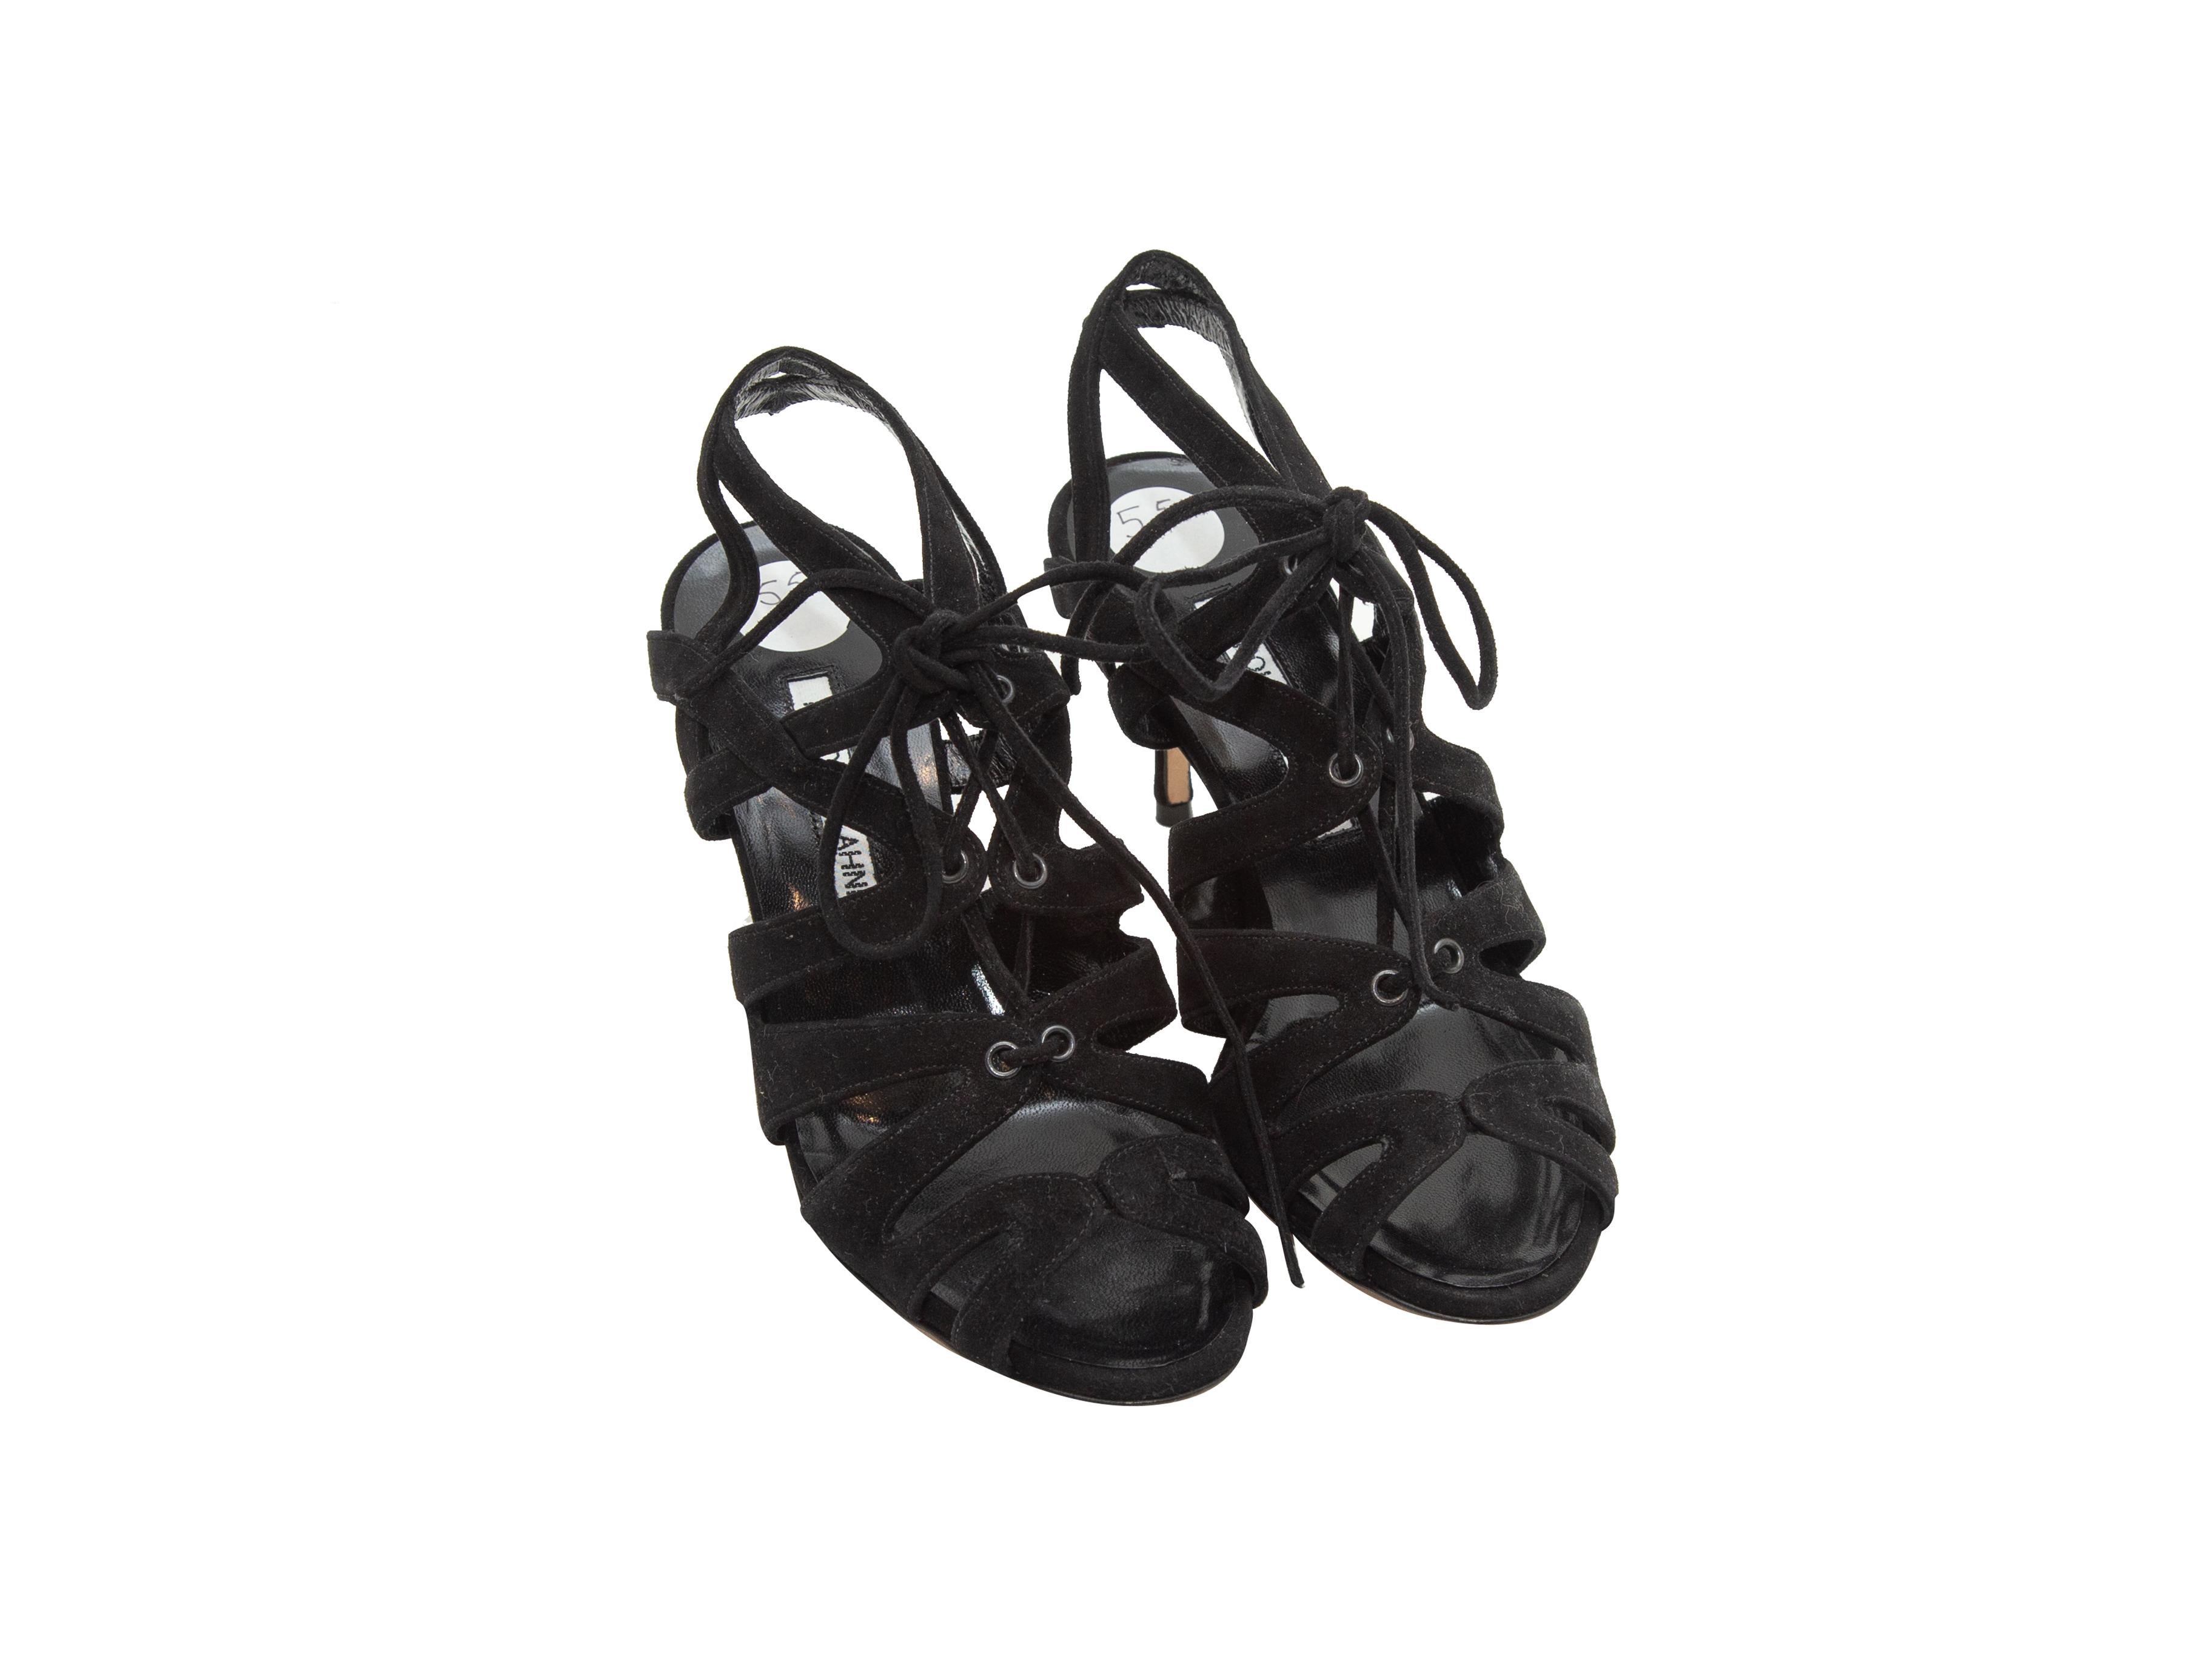 Product details: Black suede Netochka 70 cage sandals by Manolo Blahnik. Tie closures at tops. Designer size 35.5. 3